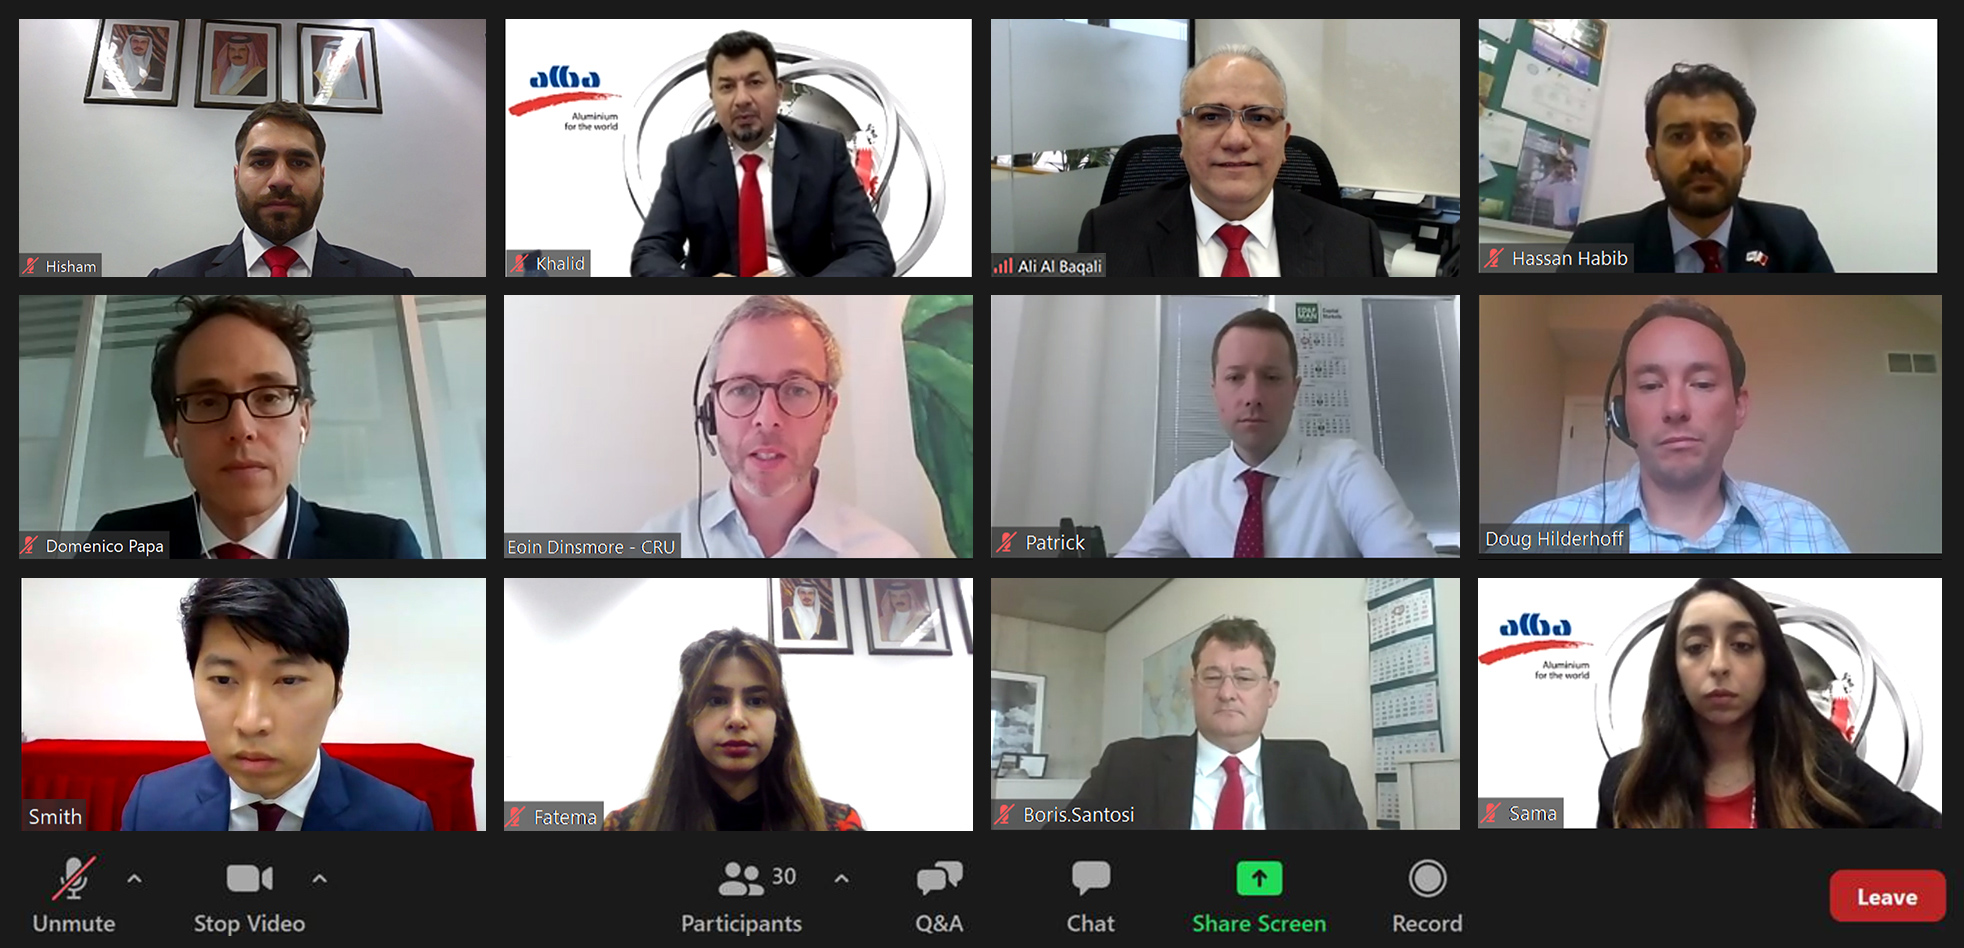 Alba hosts virtual sessions for its customers in partnership with CRU